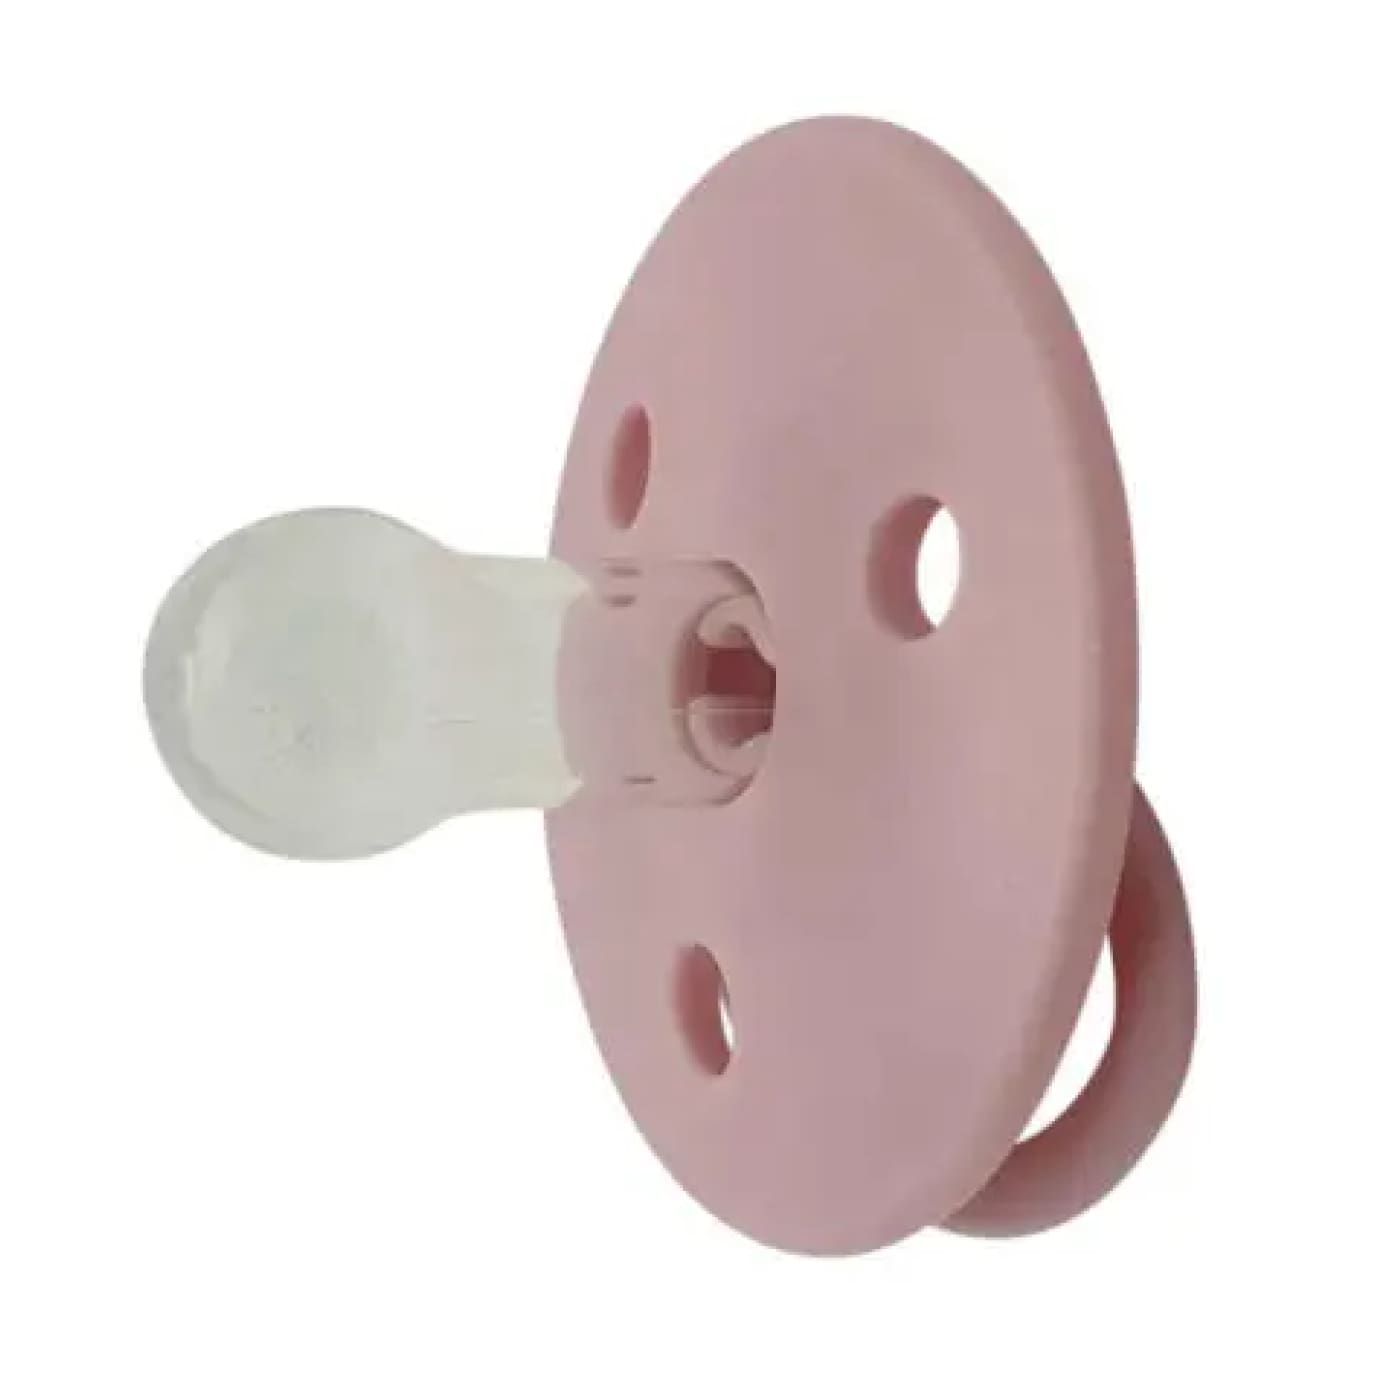 Mininor Silicone Pacifier/Dummy - Rose - NURSING & FEEDING - DUMMIES/SOOTHERS